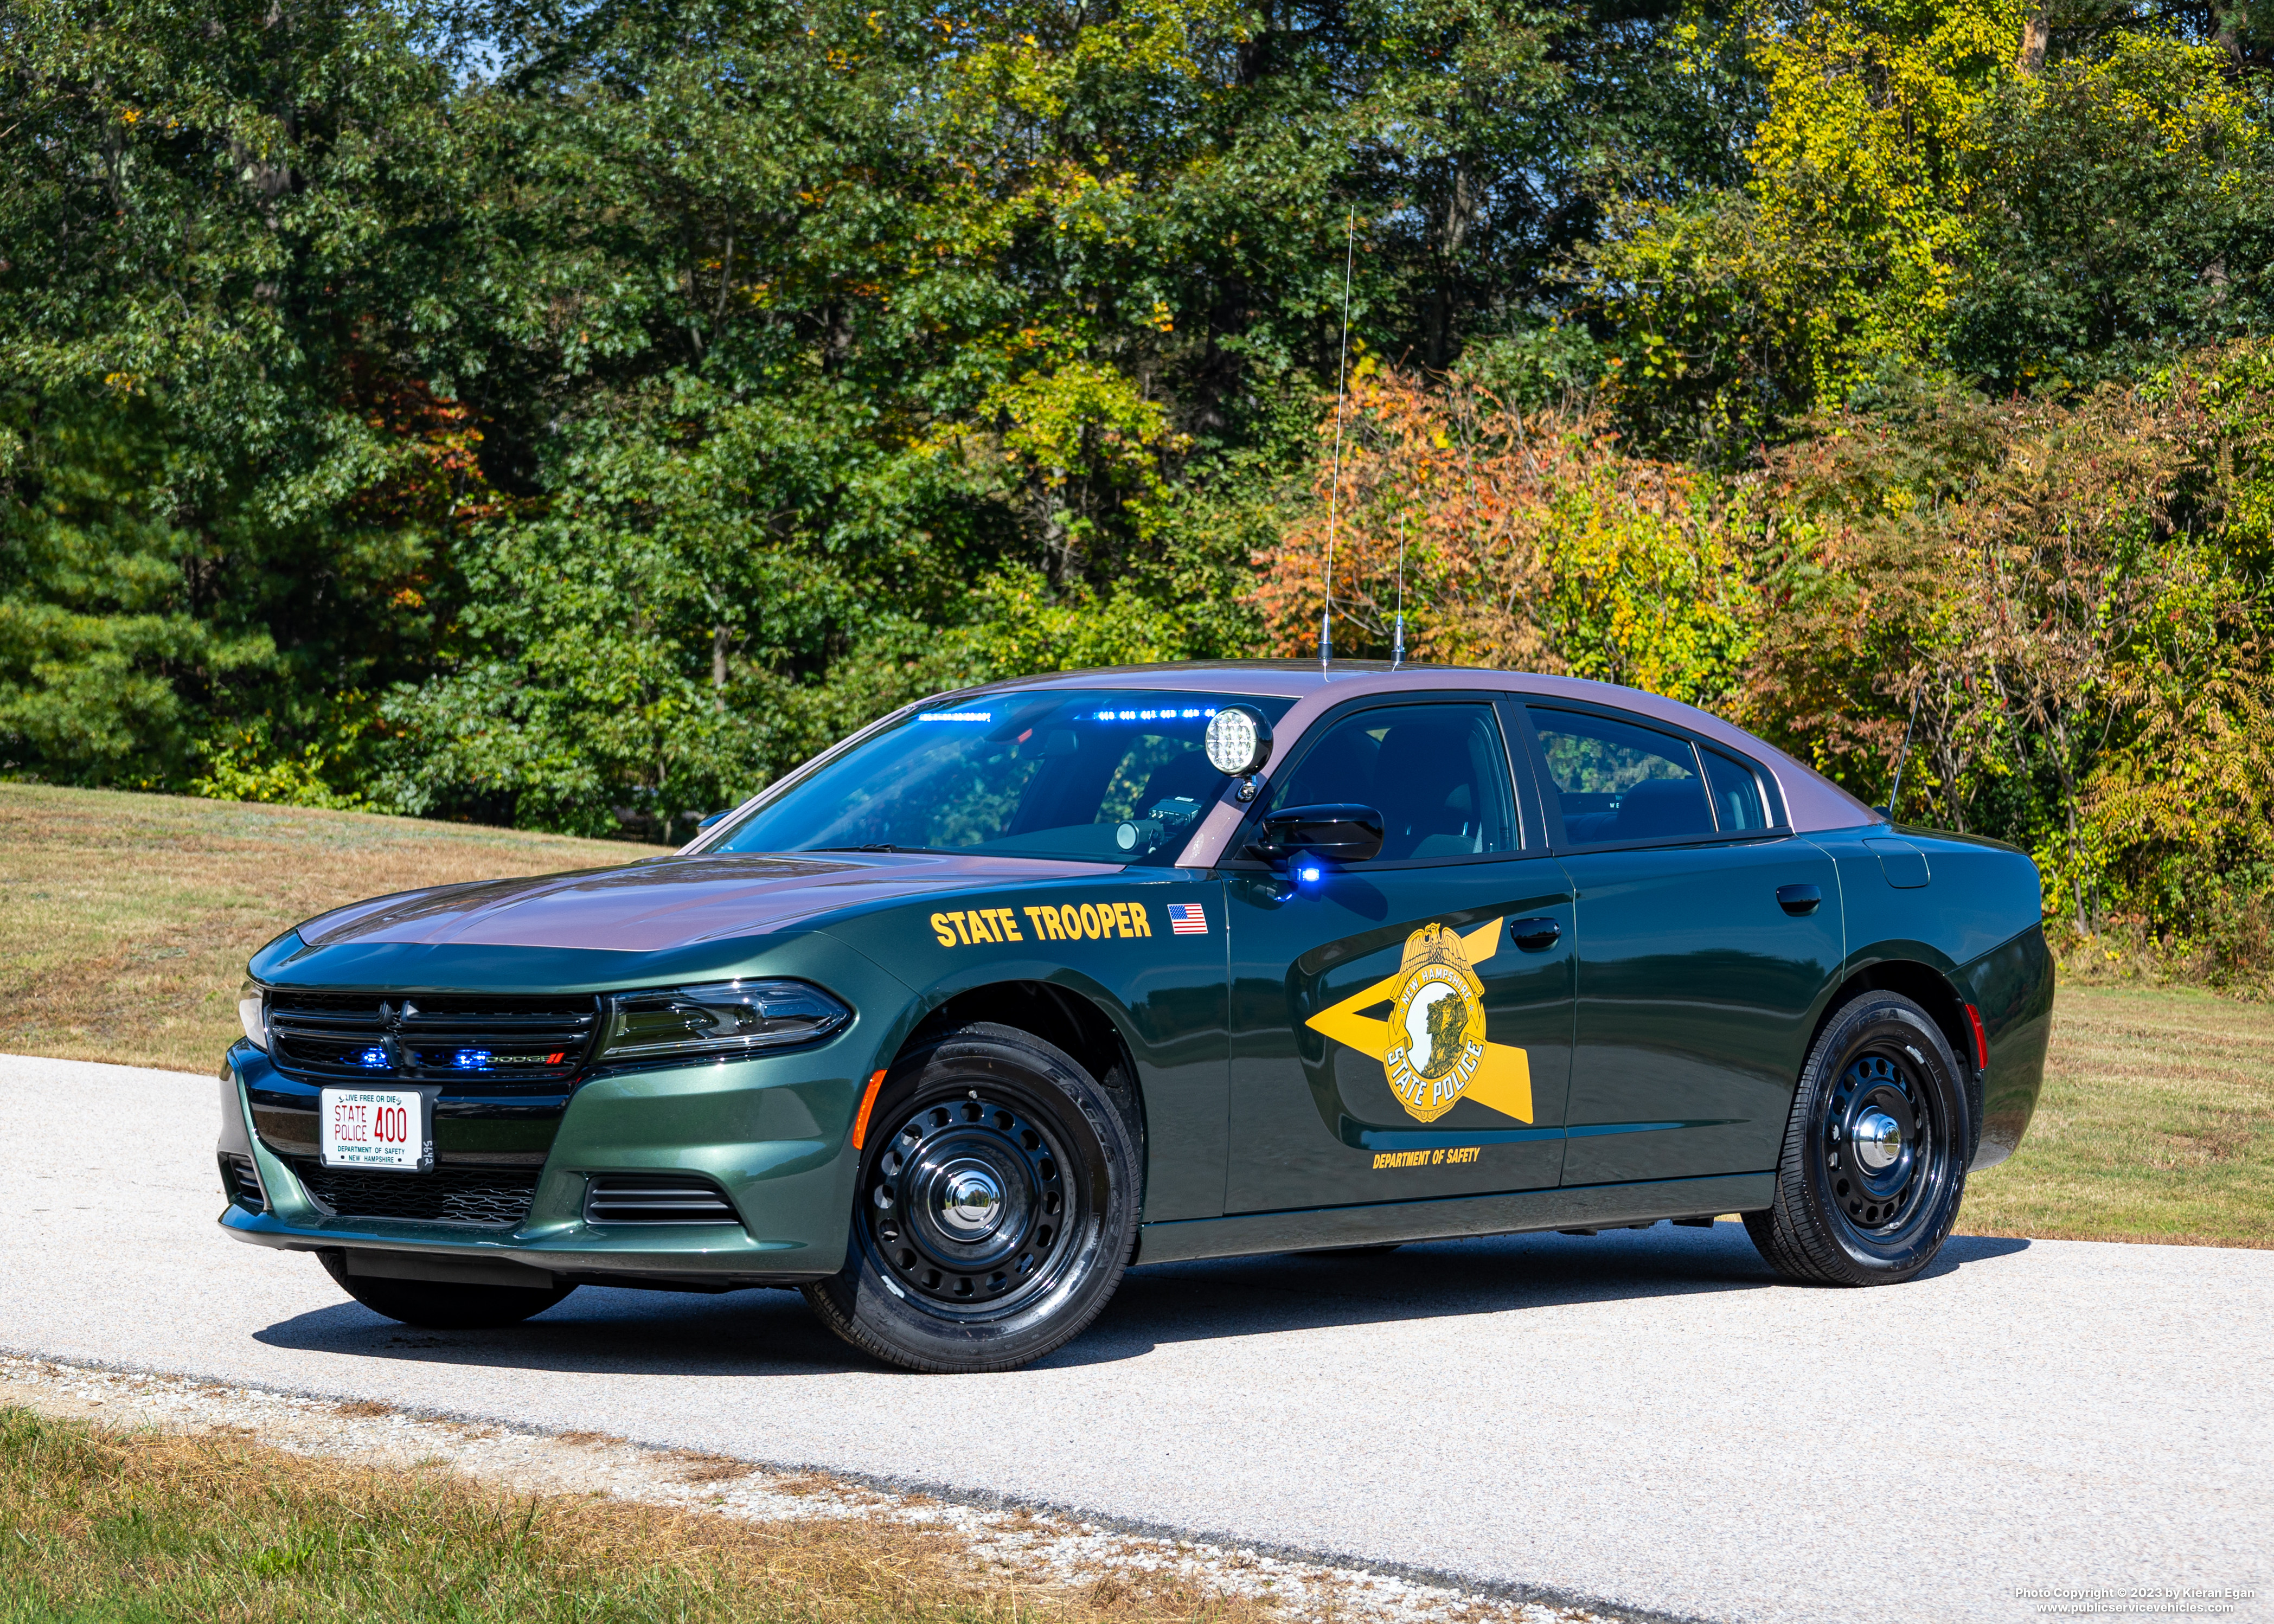 A photo  of New Hampshire State Police
            Cruiser 400, a 2022 Dodge Charger             taken by Kieran Egan